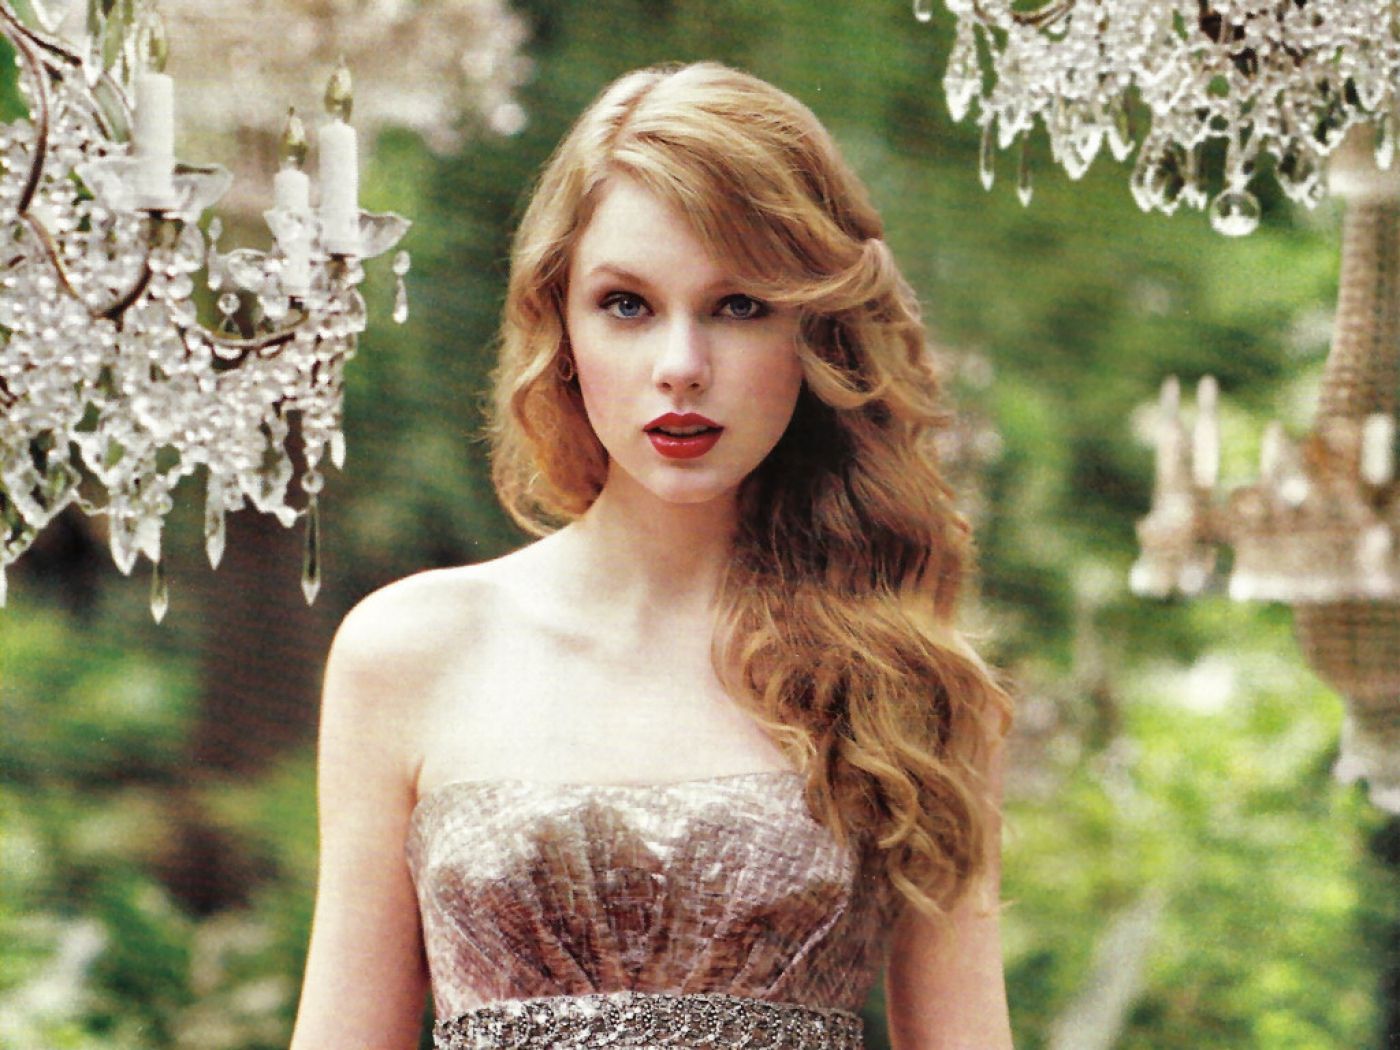 Download wallpaper music Taylor Swift with tags: Desktop